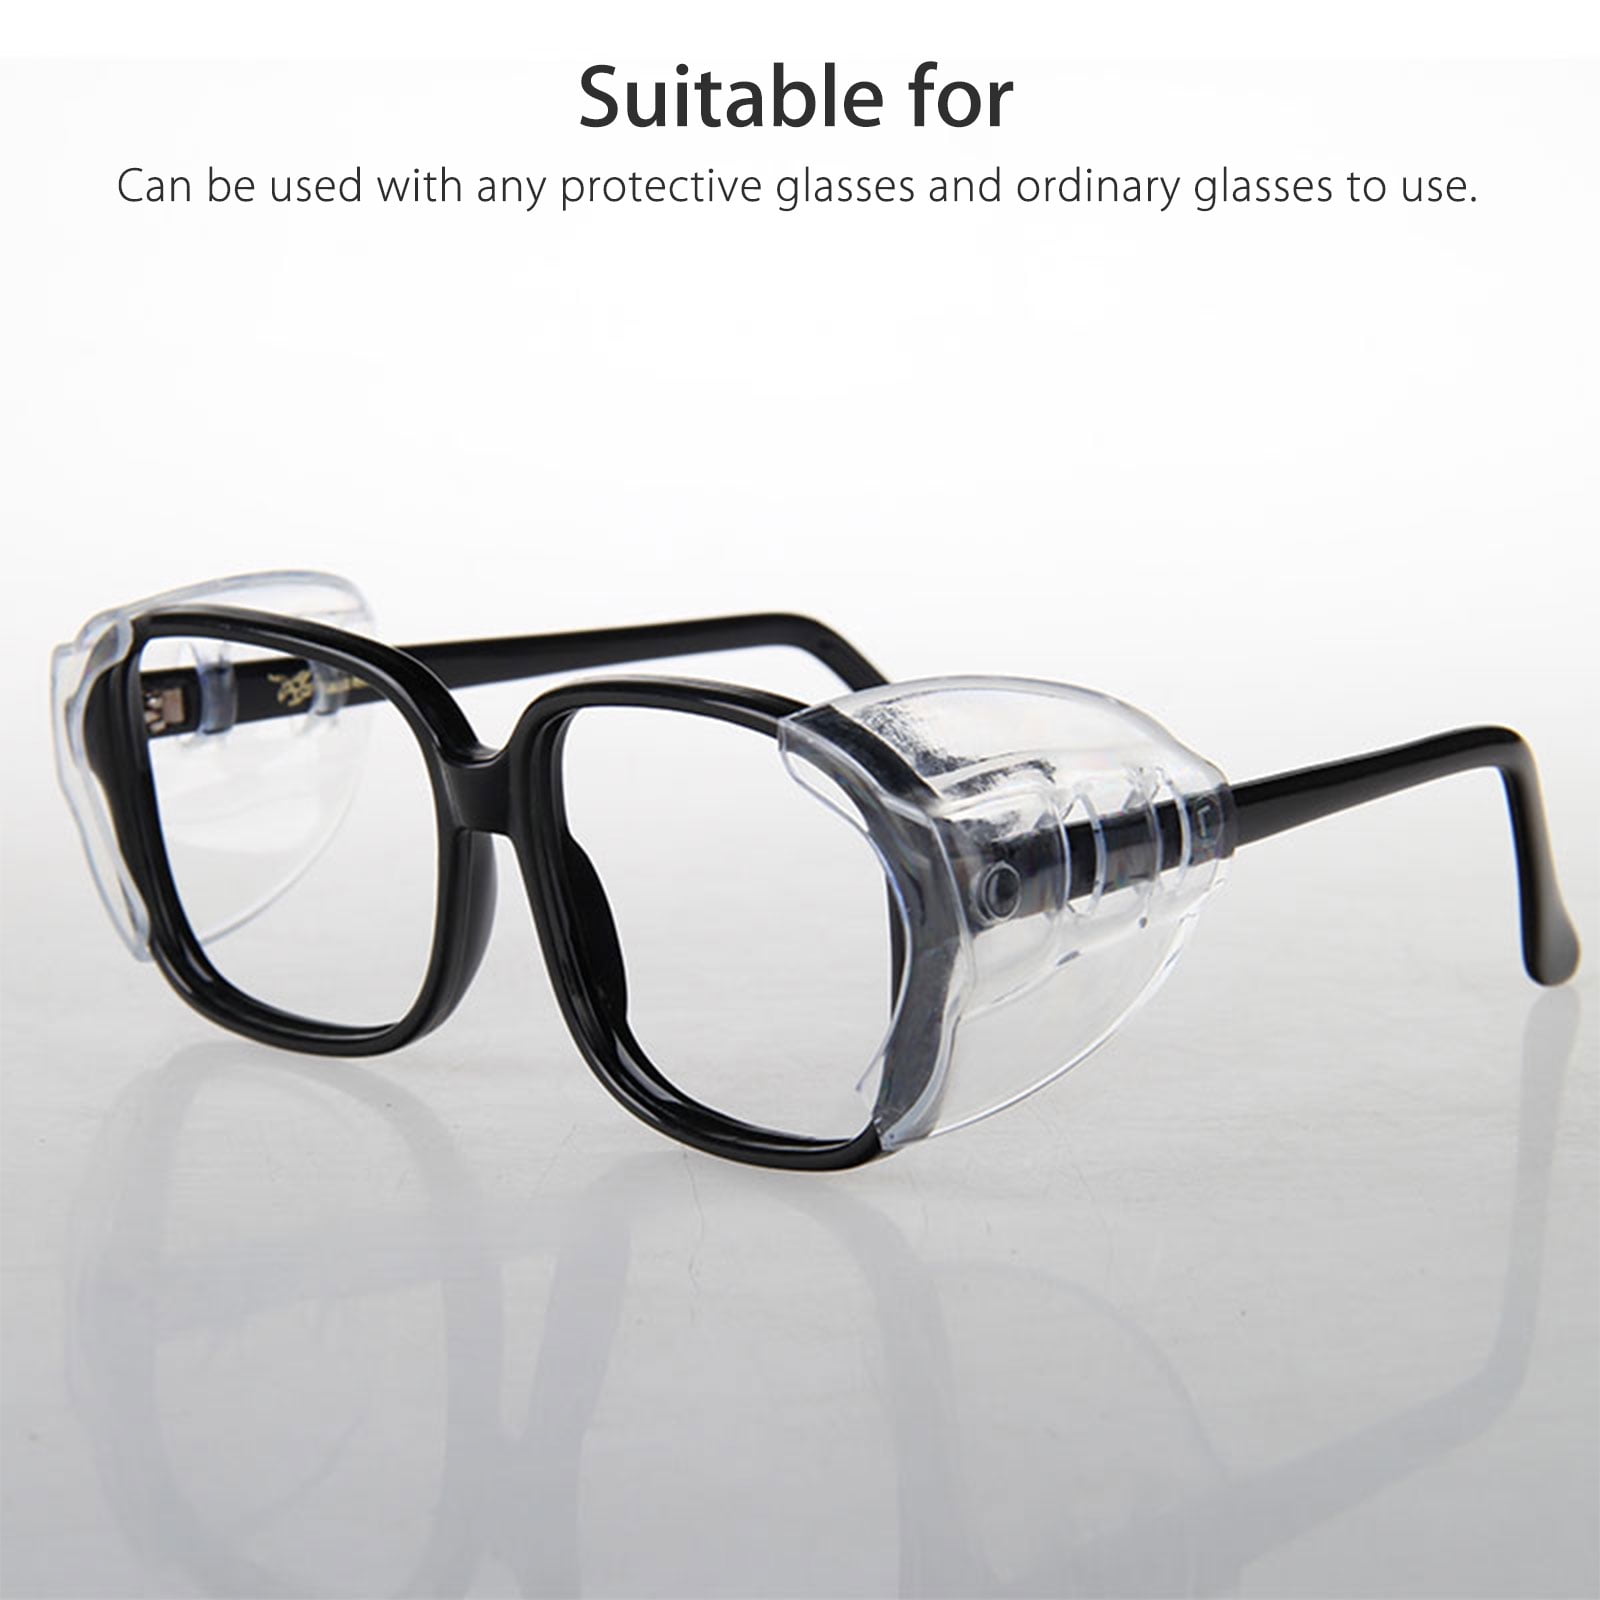 Large One Pair Eyiou Slip-On Clear Safety Glasses Side Shields for Medium to Large Glasses 